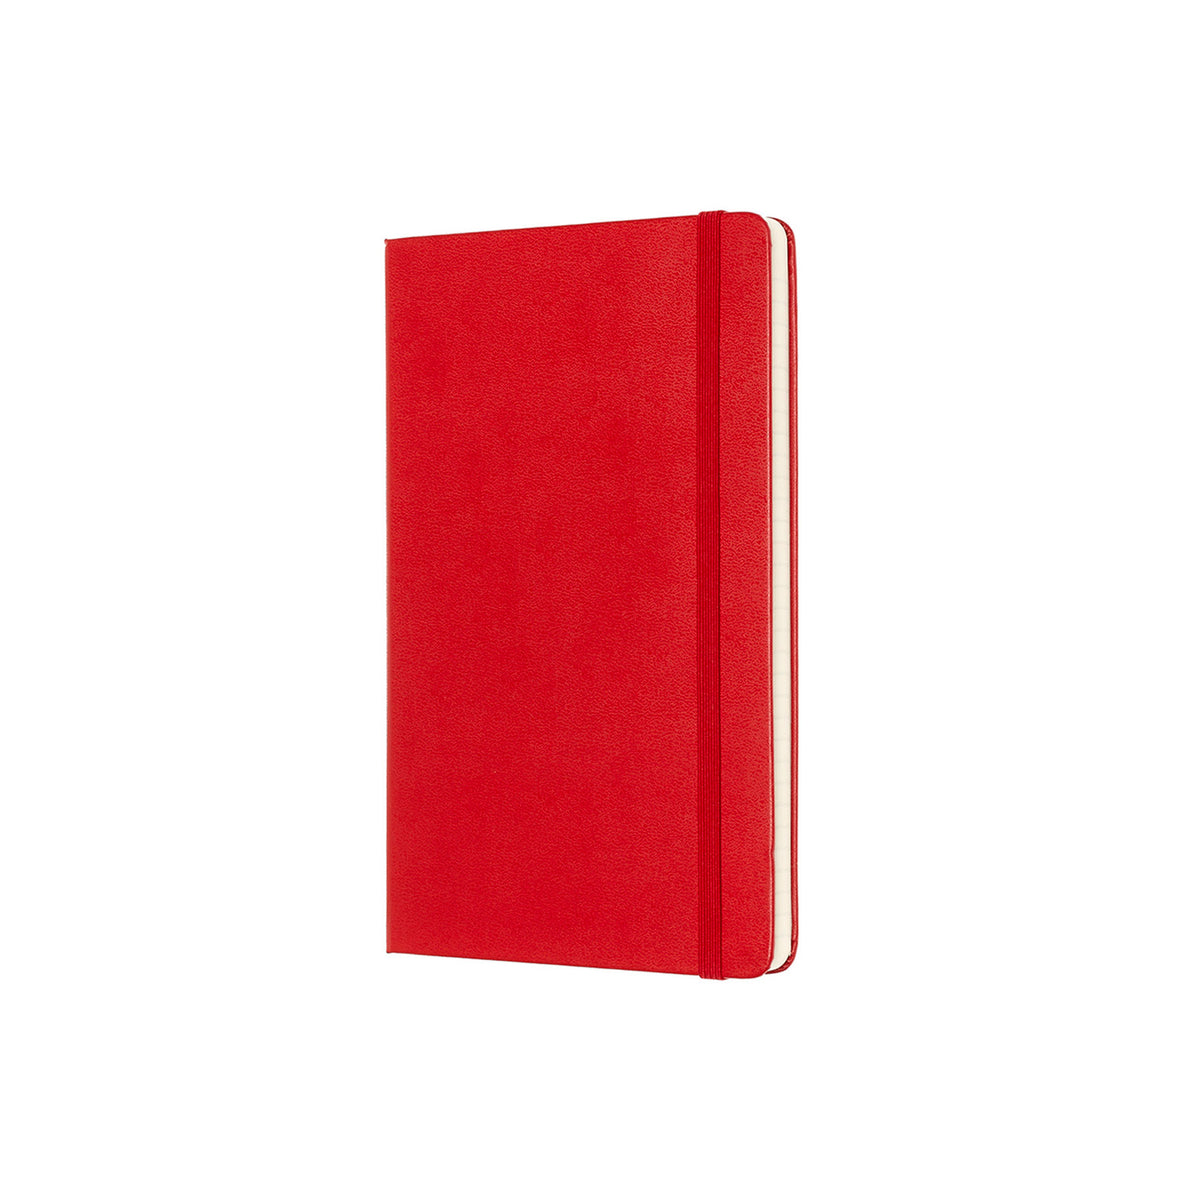 Moleskine - Classic Hard Cover Notebook - Grid - Large - Scarlet Red